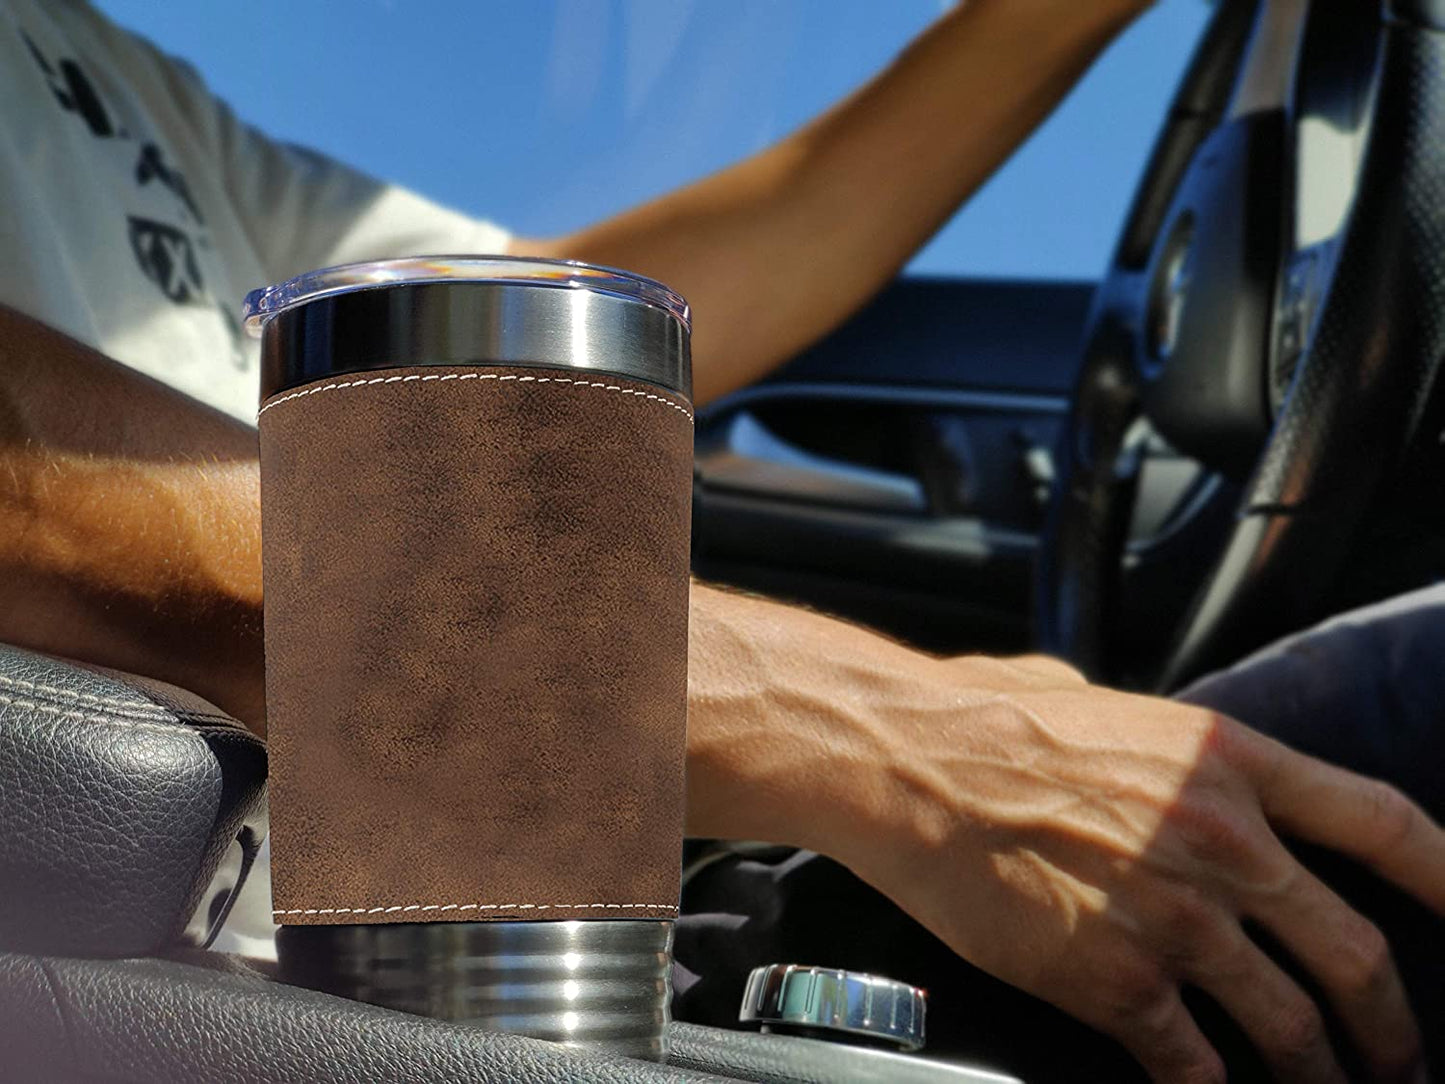 20oz Faux Leather Tumbler Mug, Real Estate, Personalized Engraving Included - LaserGram Custom Engraved Gifts